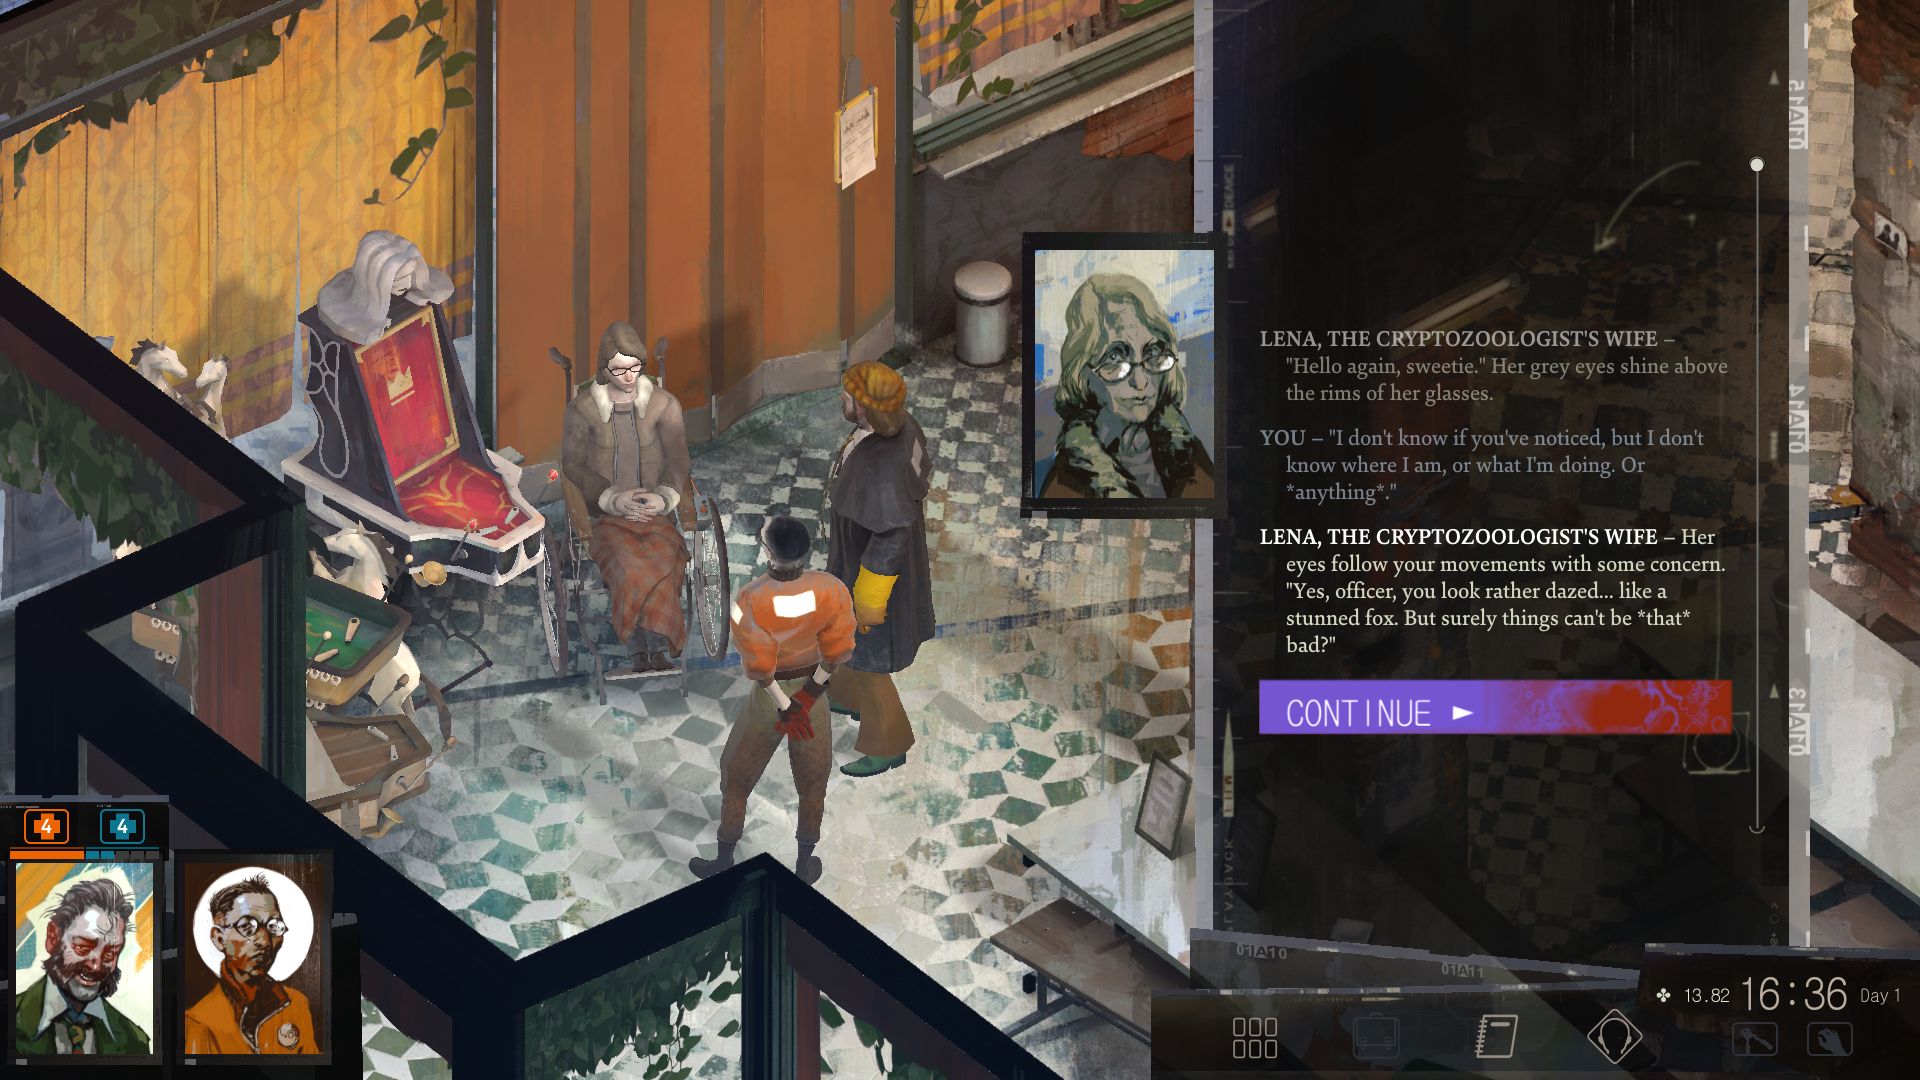 Image for Disco Elysium considered Twitter its competition for players' attention